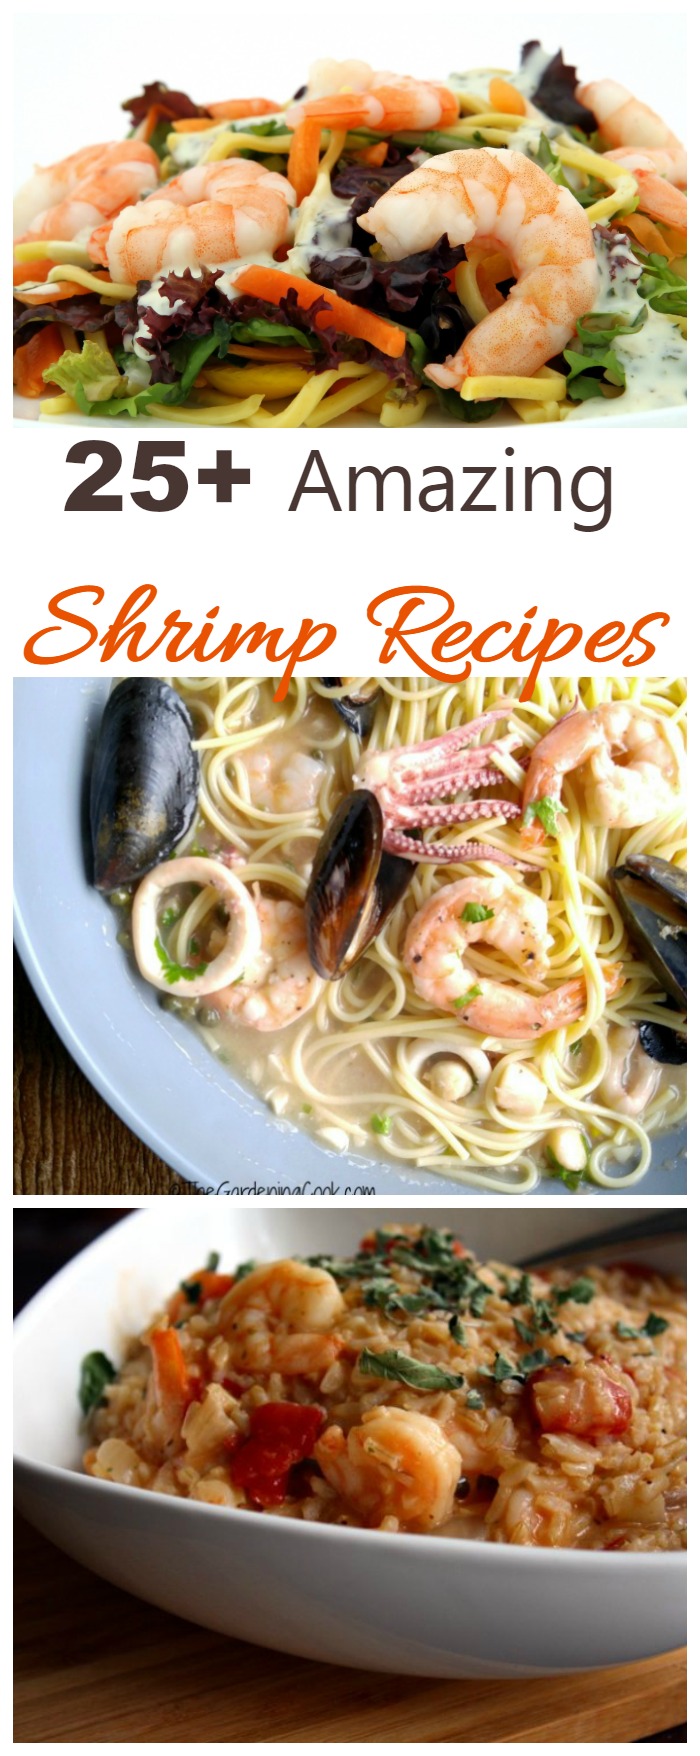 Shrimp is such a versatile seafood. It's fast, delicious and easy to prepare. Check out this collection of over 25 amazing shrimp recipes